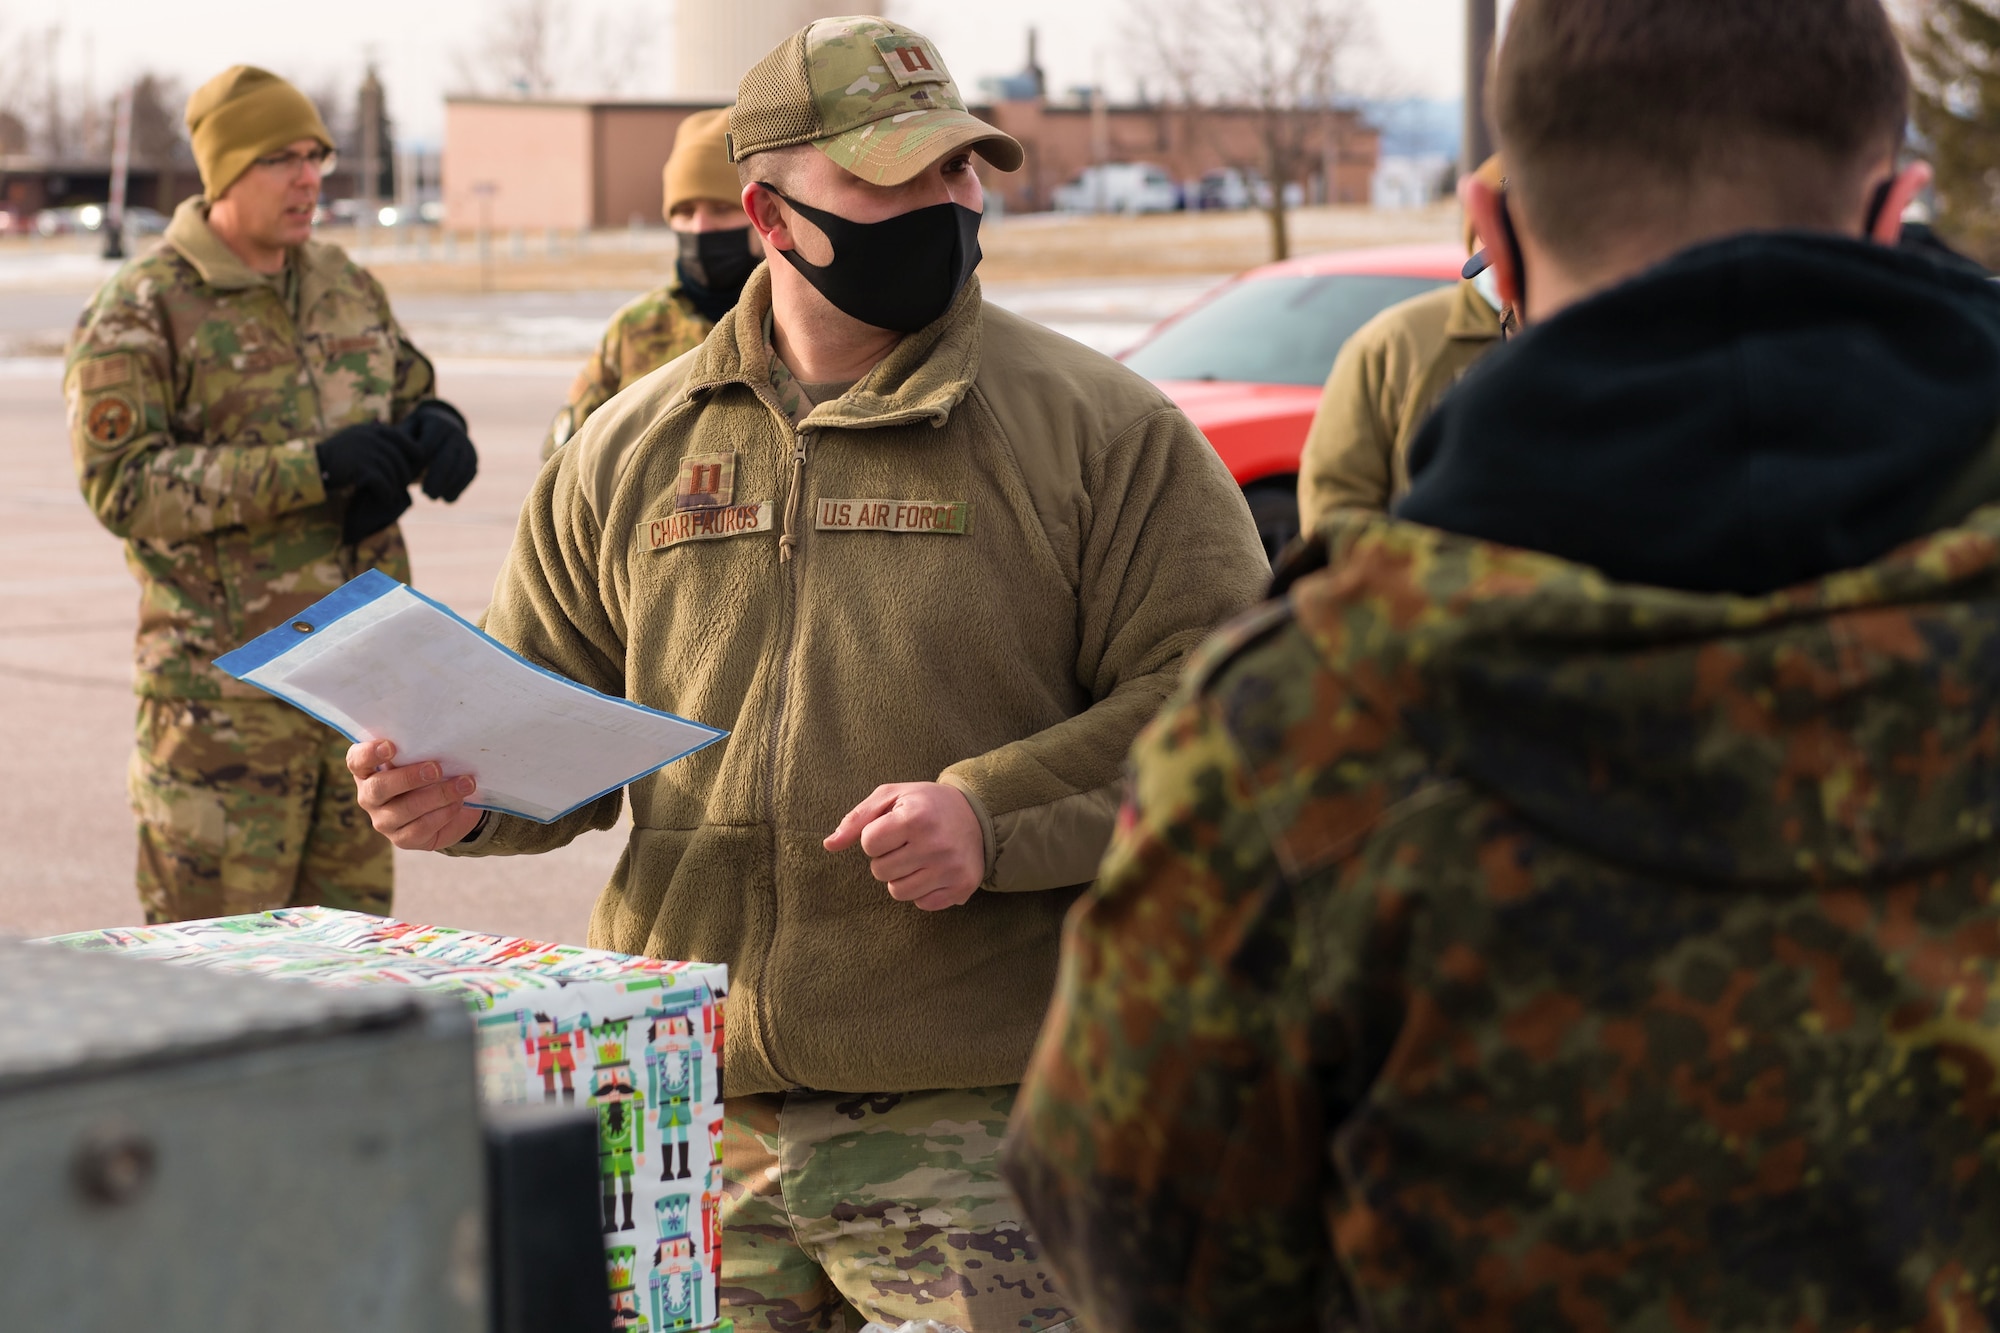 U.S. Air Force Capt. Travis Charfauros, 28th Aircraft Maintenance Squadron the director of operations with the 28th AMXS maintenance squadron, assists in a meat donation, on at Ellsworth Air Force Base, S.D., Jan. 6, 2022.